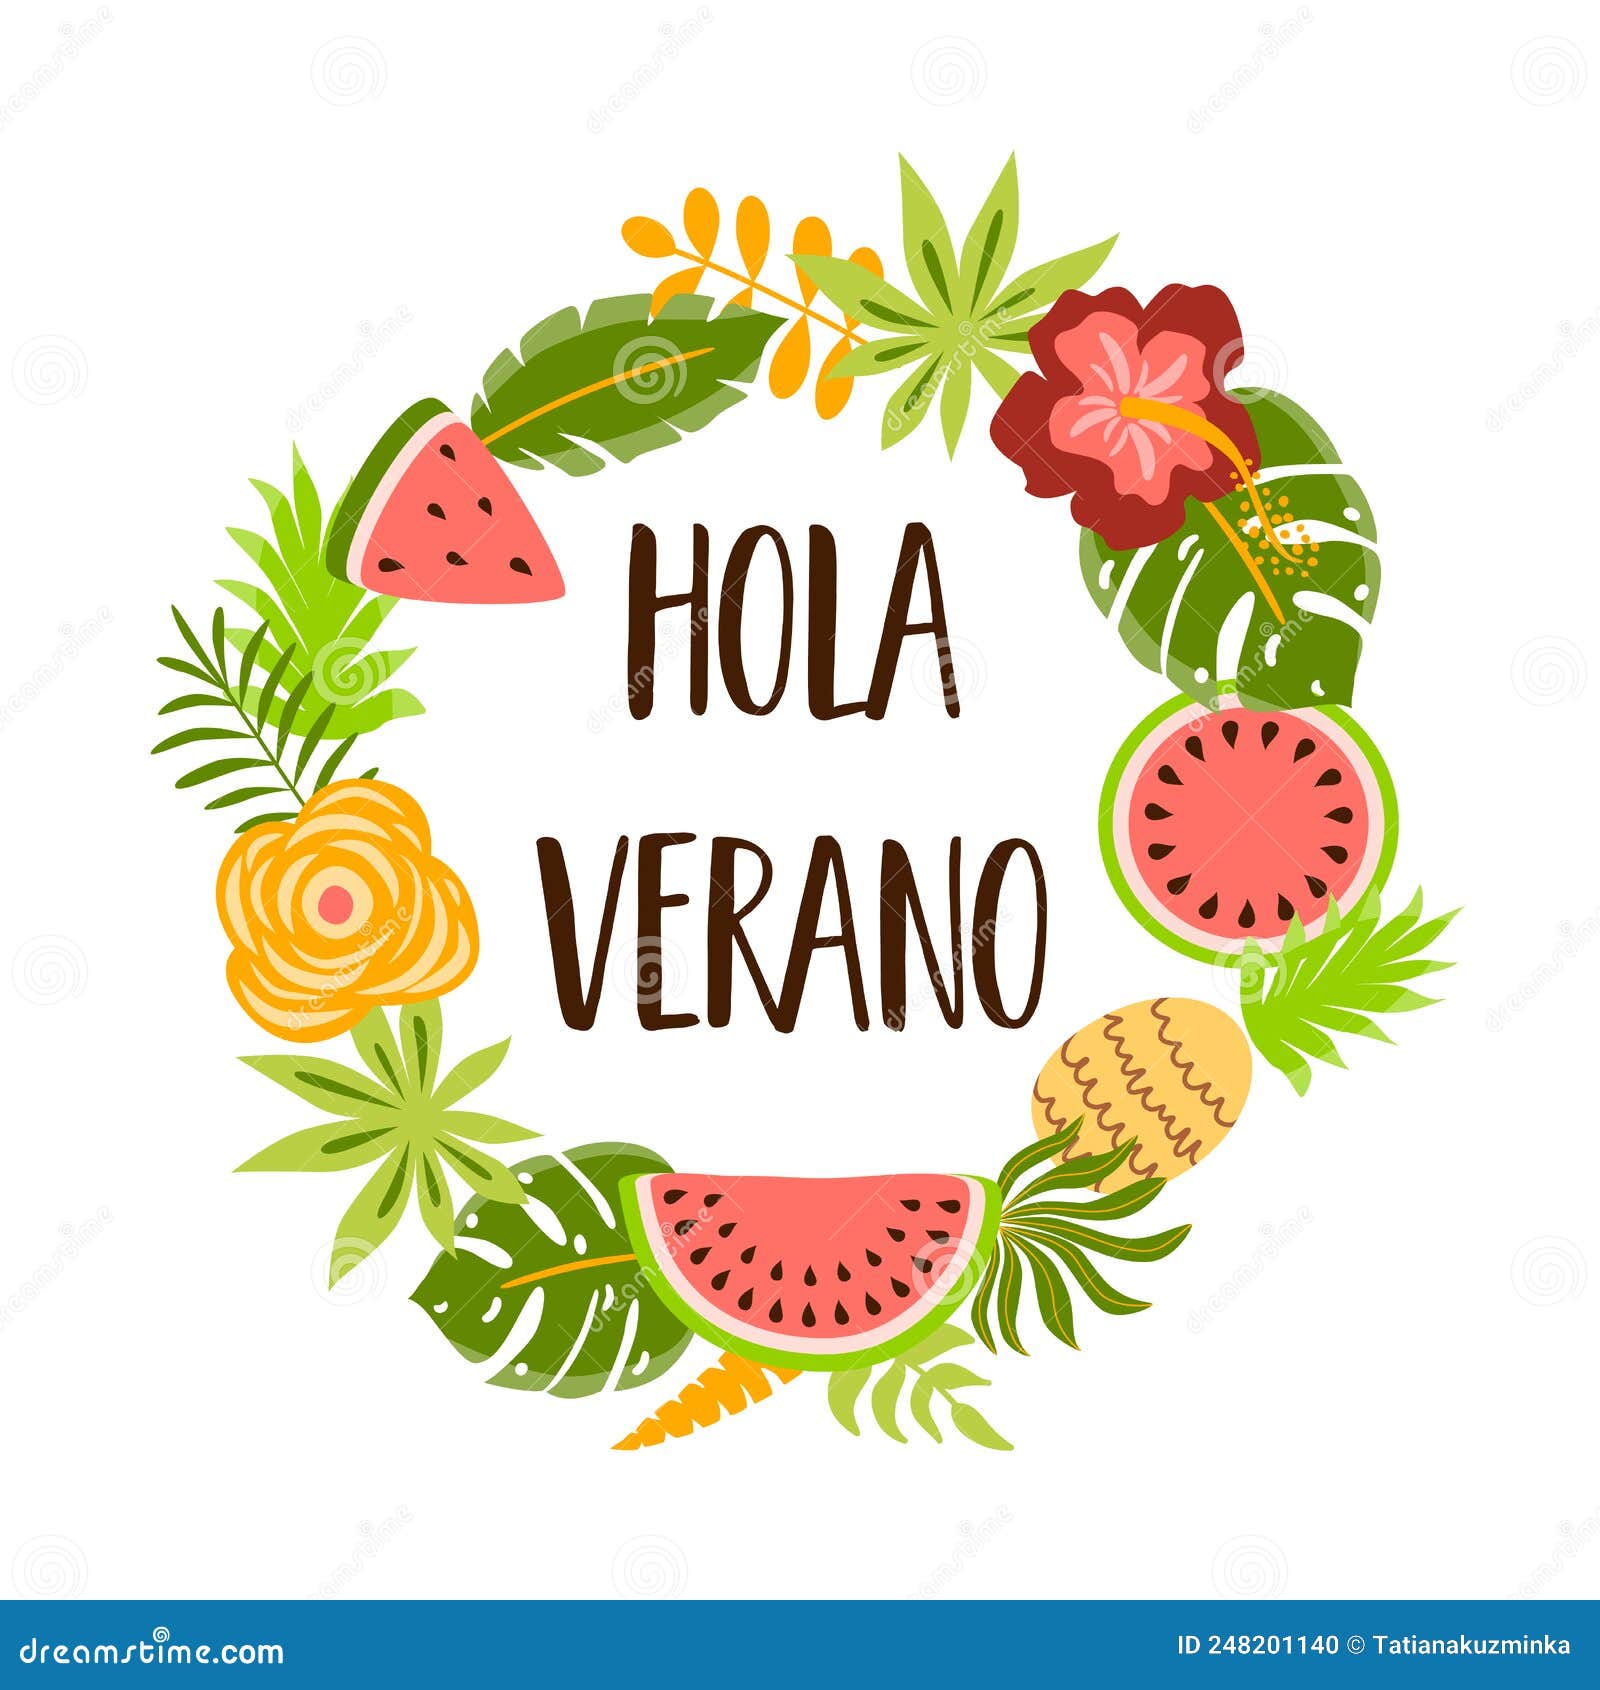 hola verano text in spanish means hello summer. cute summer banner with tropical fruits flowers palm leaves. decorative